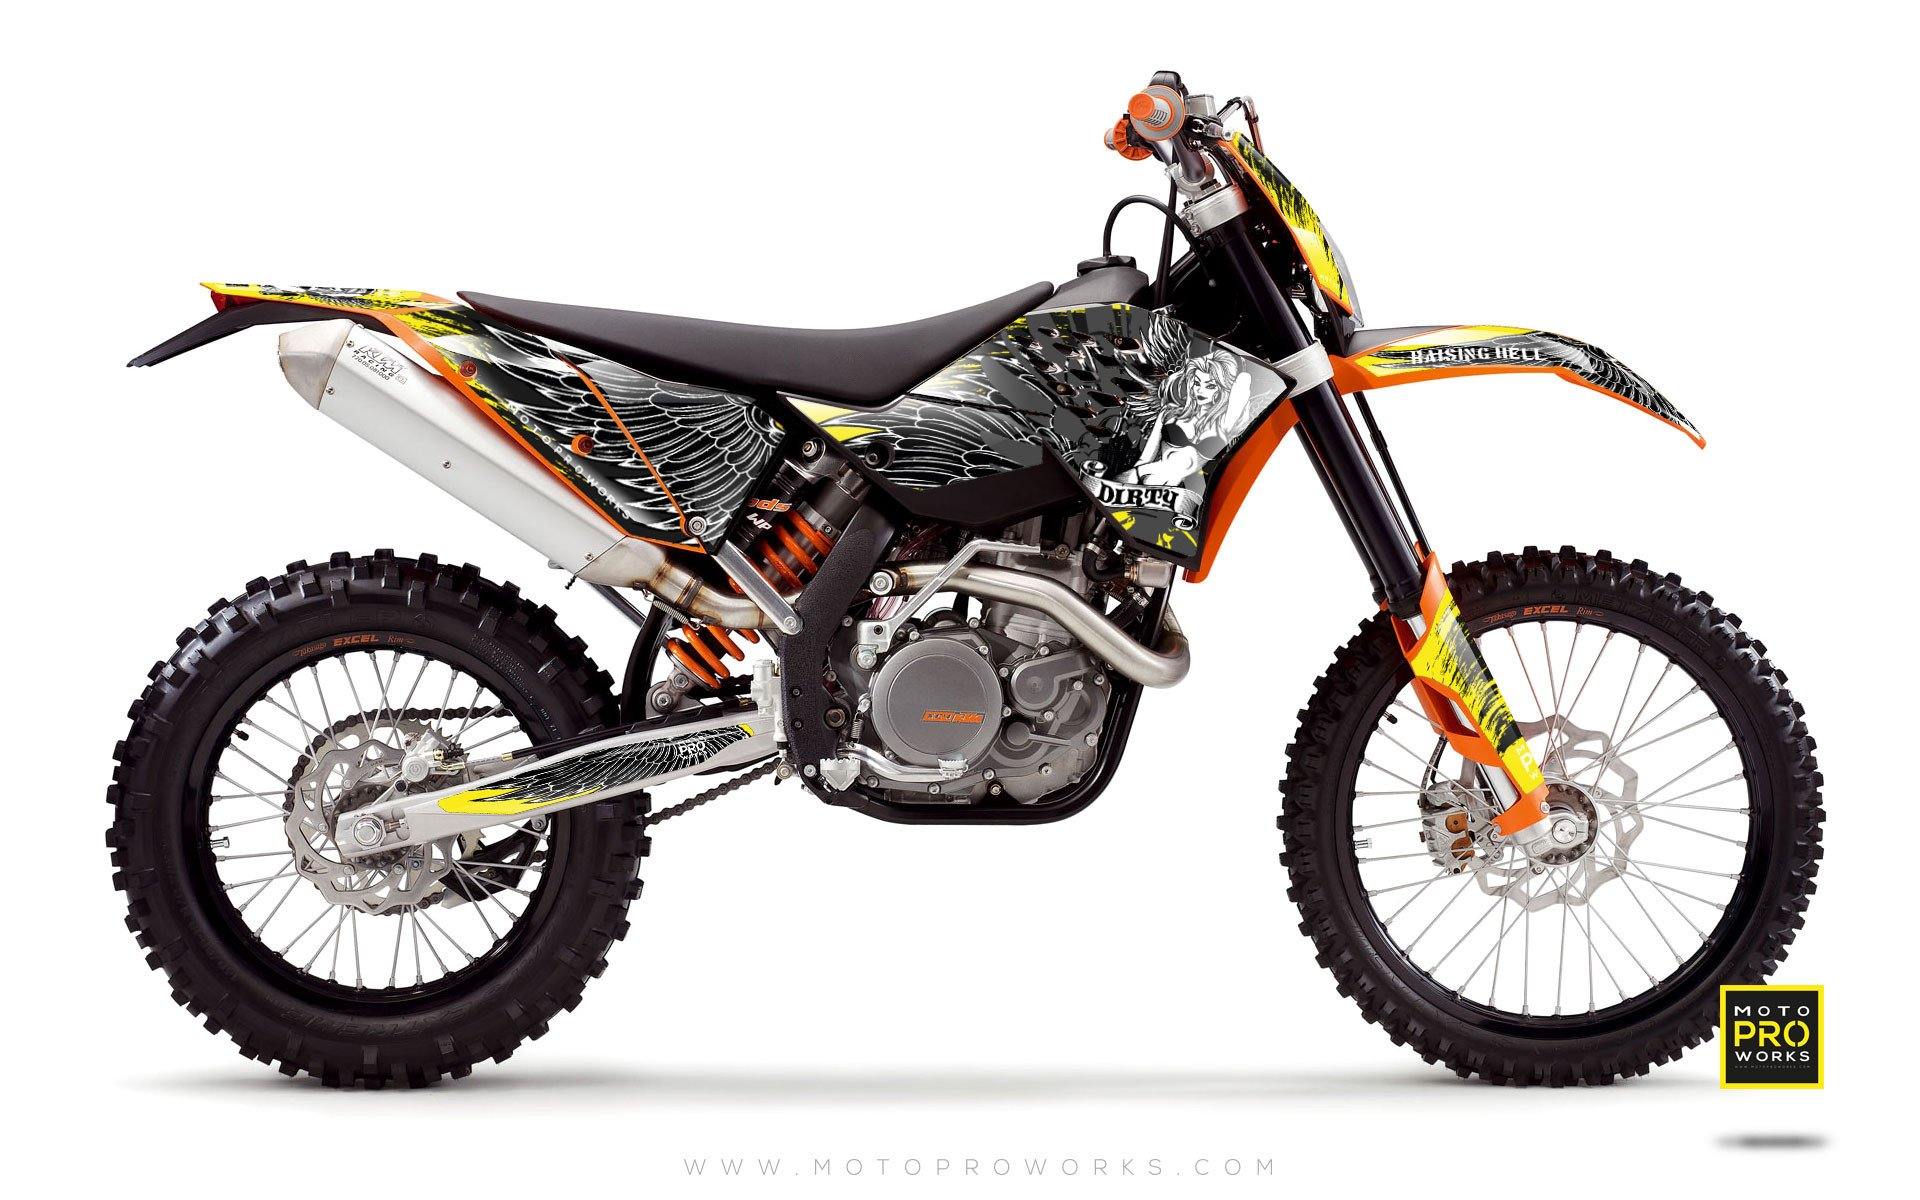 KTM GRAPHIC KIT - "Dirty Angel" (yellow) - MotoProWorks | Decals and Bike Graphic kit